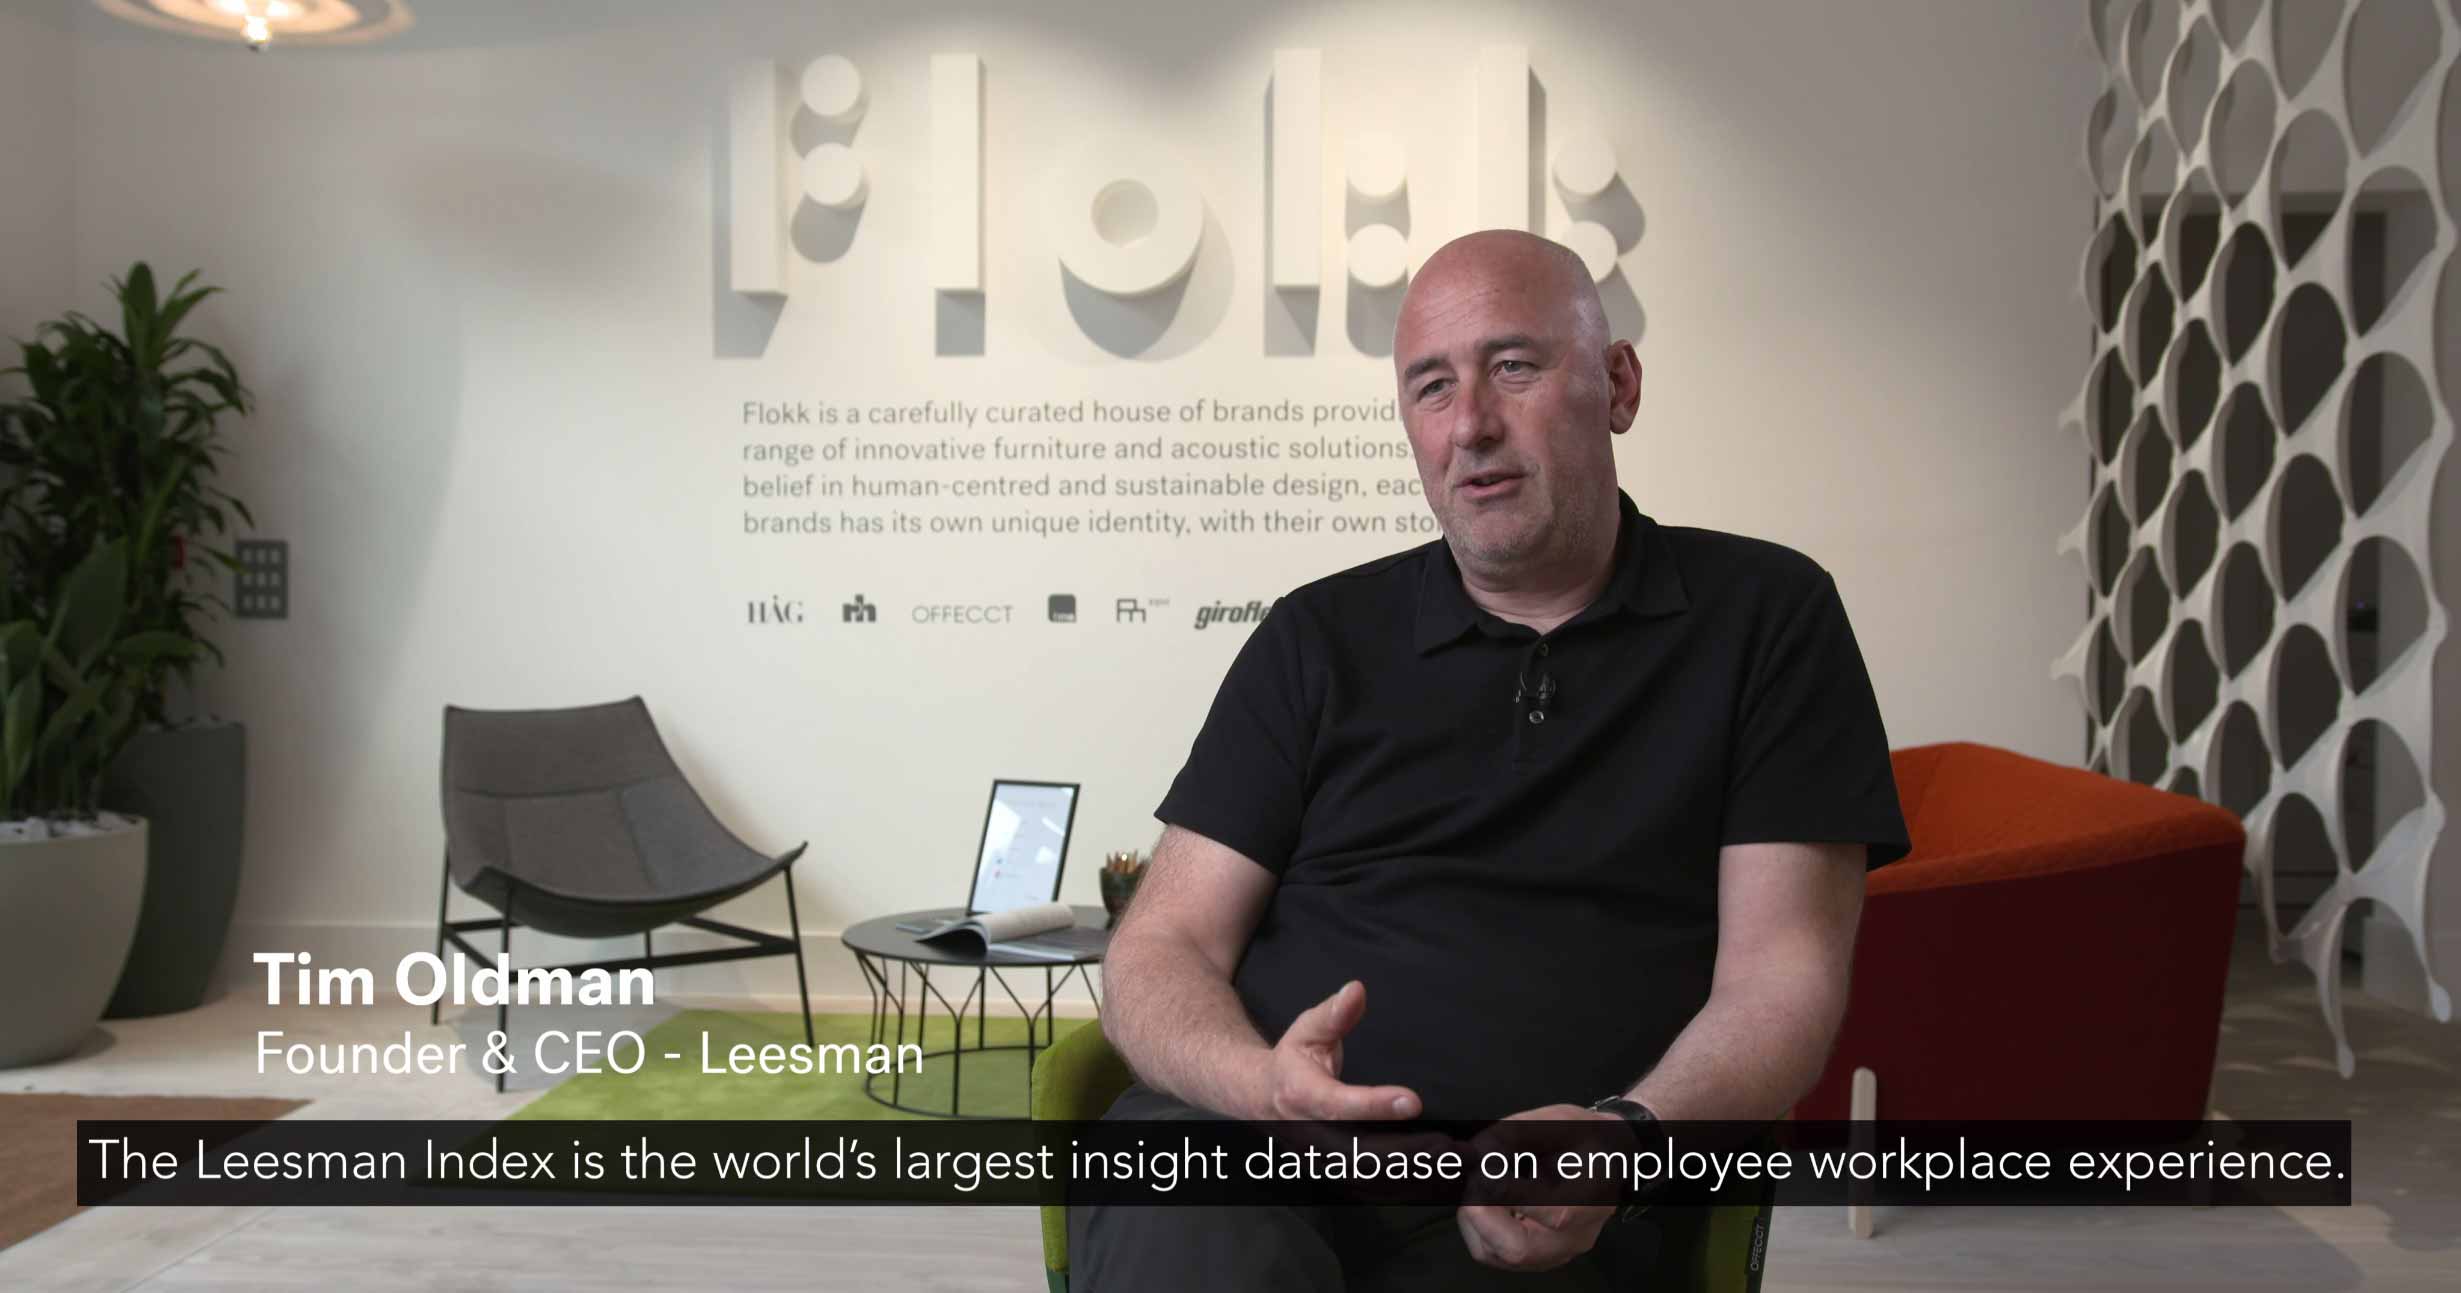 how big data effects workplace design with leesman index - interview with Tim Oldman